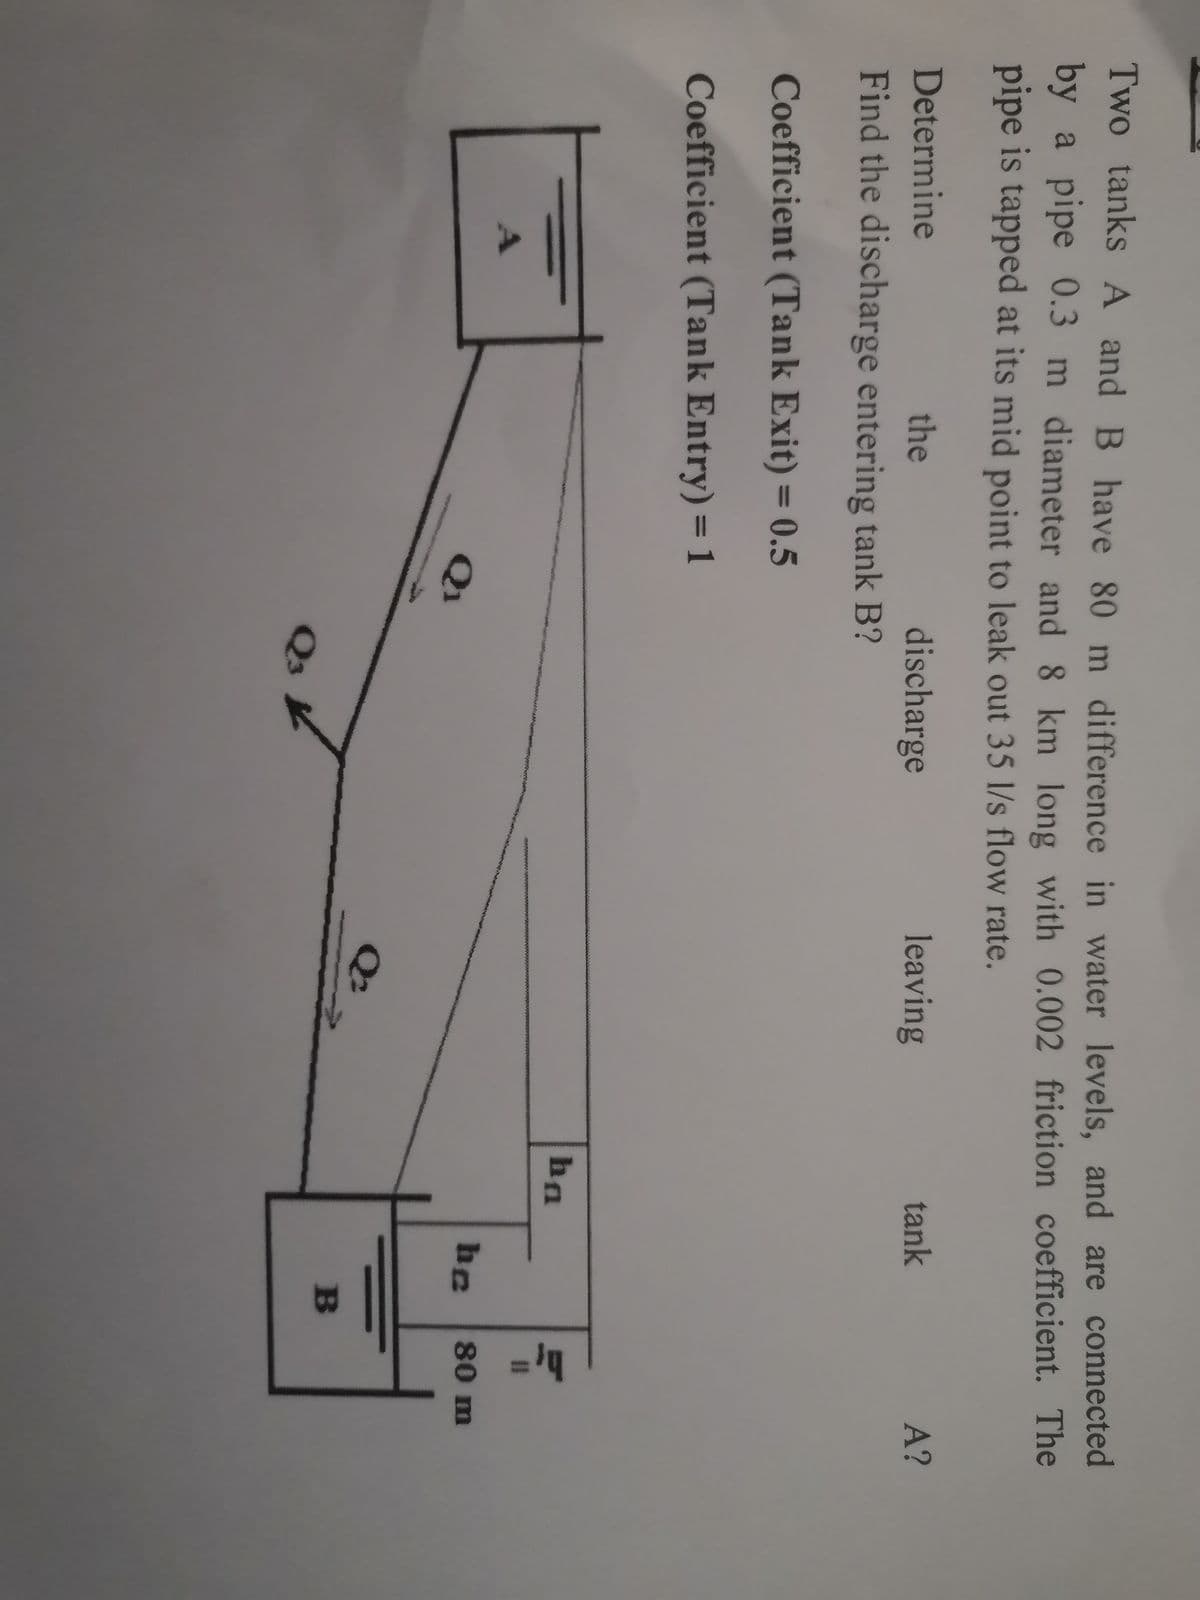 Two tanks A and B have 80 m difference in water levels, and are connected
by a pipe 0.3 m diameter and 8 km long with 0.002 friction coefficient. The
pipe is tapped at its mid point to leak out 35 1/s flow rate.
the
discharge
leaving
tank
A?
Determine
Find the discharge entering tank B?
Coefficient (Tank Exit) = 0.5
%3D
Coefficient (Tank Entry) = 1
ba
%3D
be
80 m
Q1
Q²
Q3
